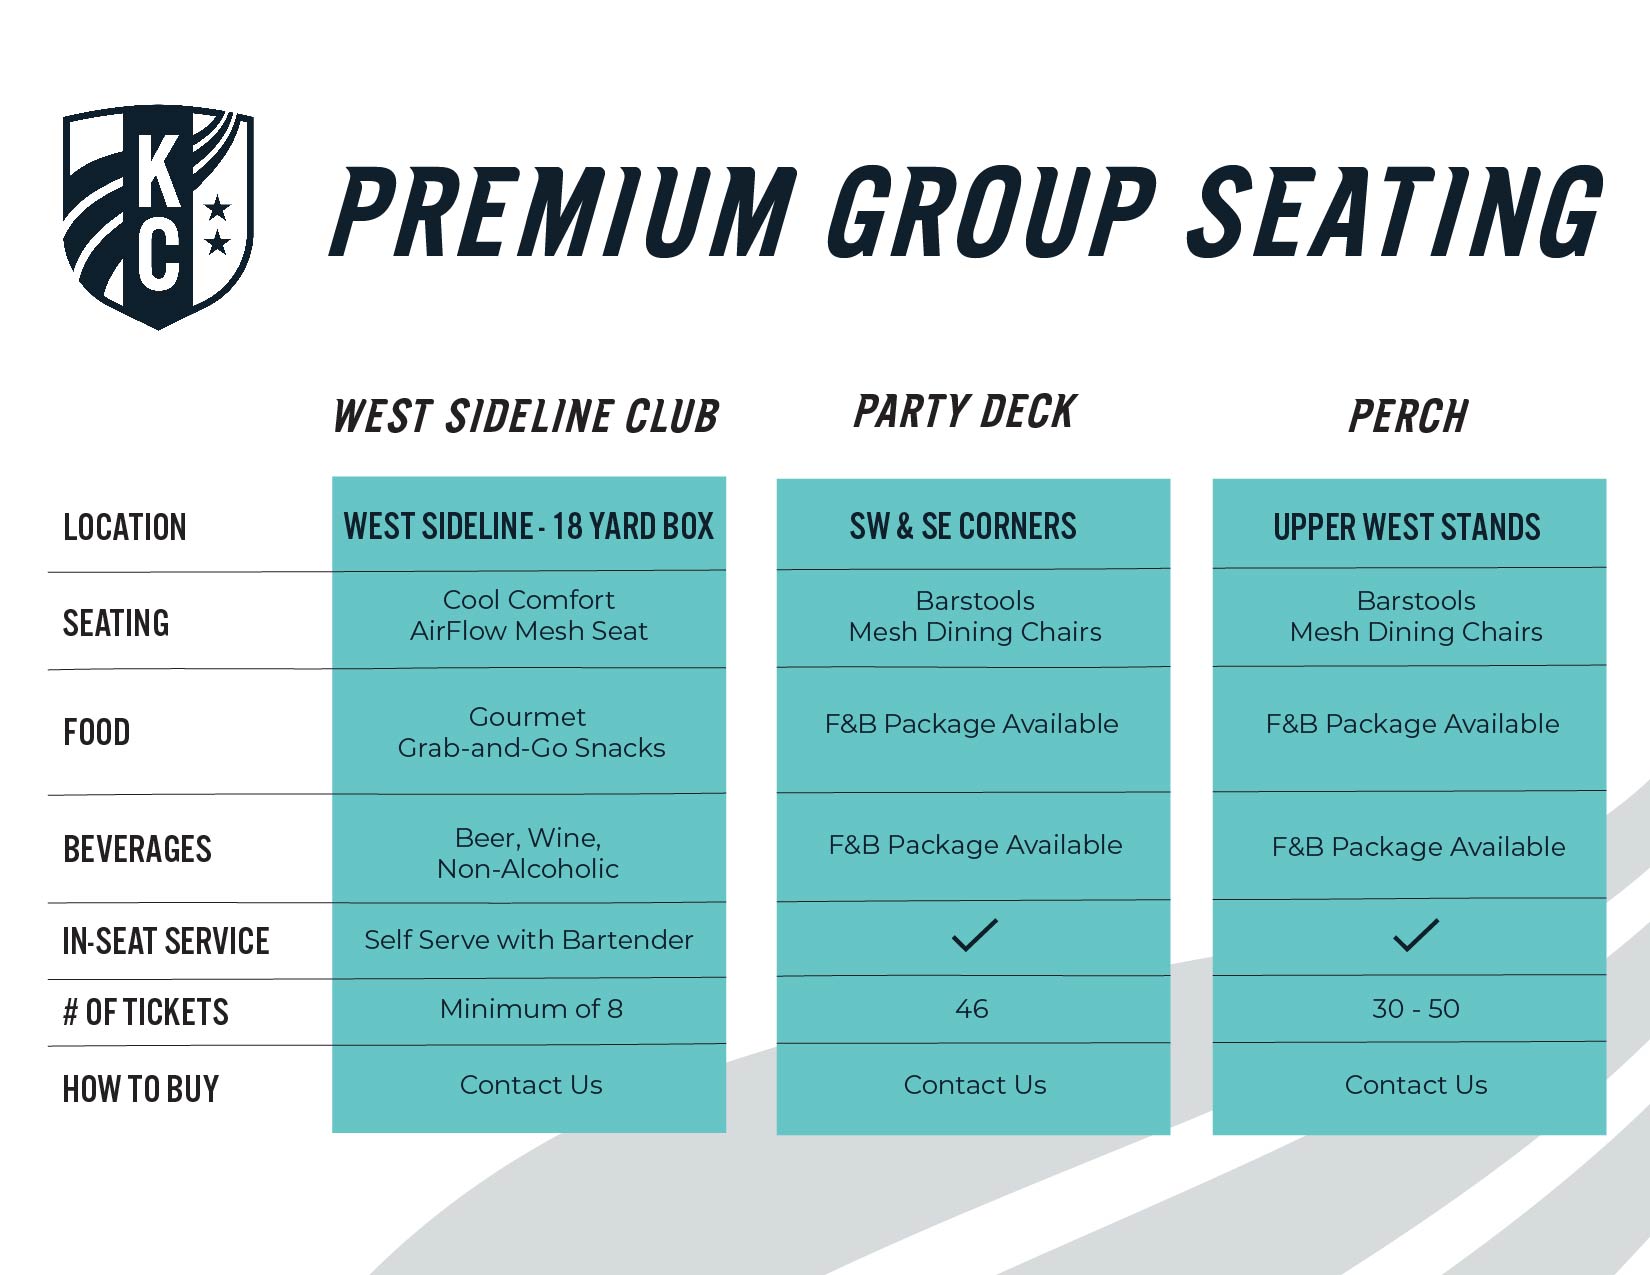 Premium Group Seating benefits for KC Current